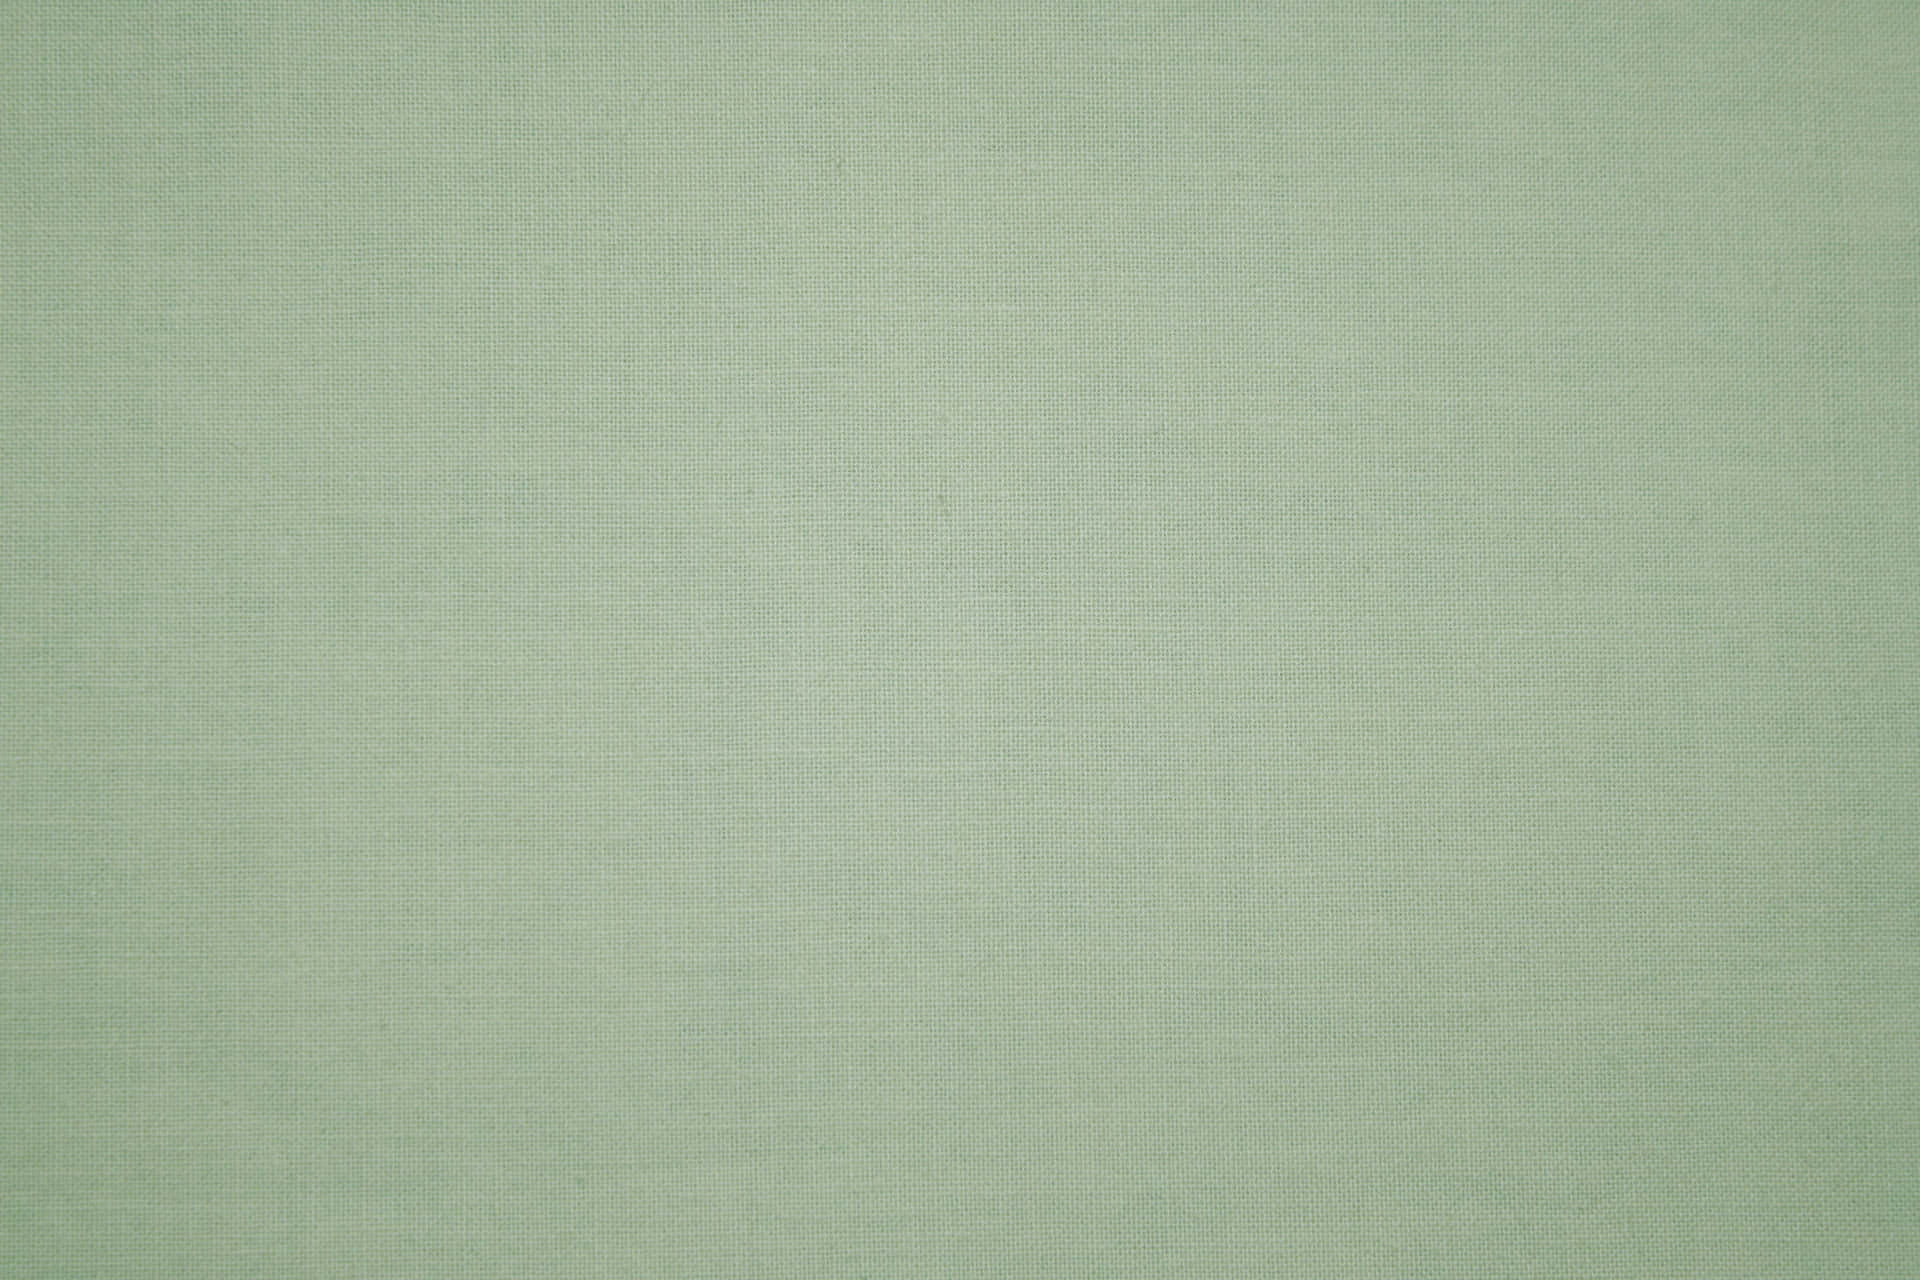 Sage green provides a refreshing and calming touch to any room.